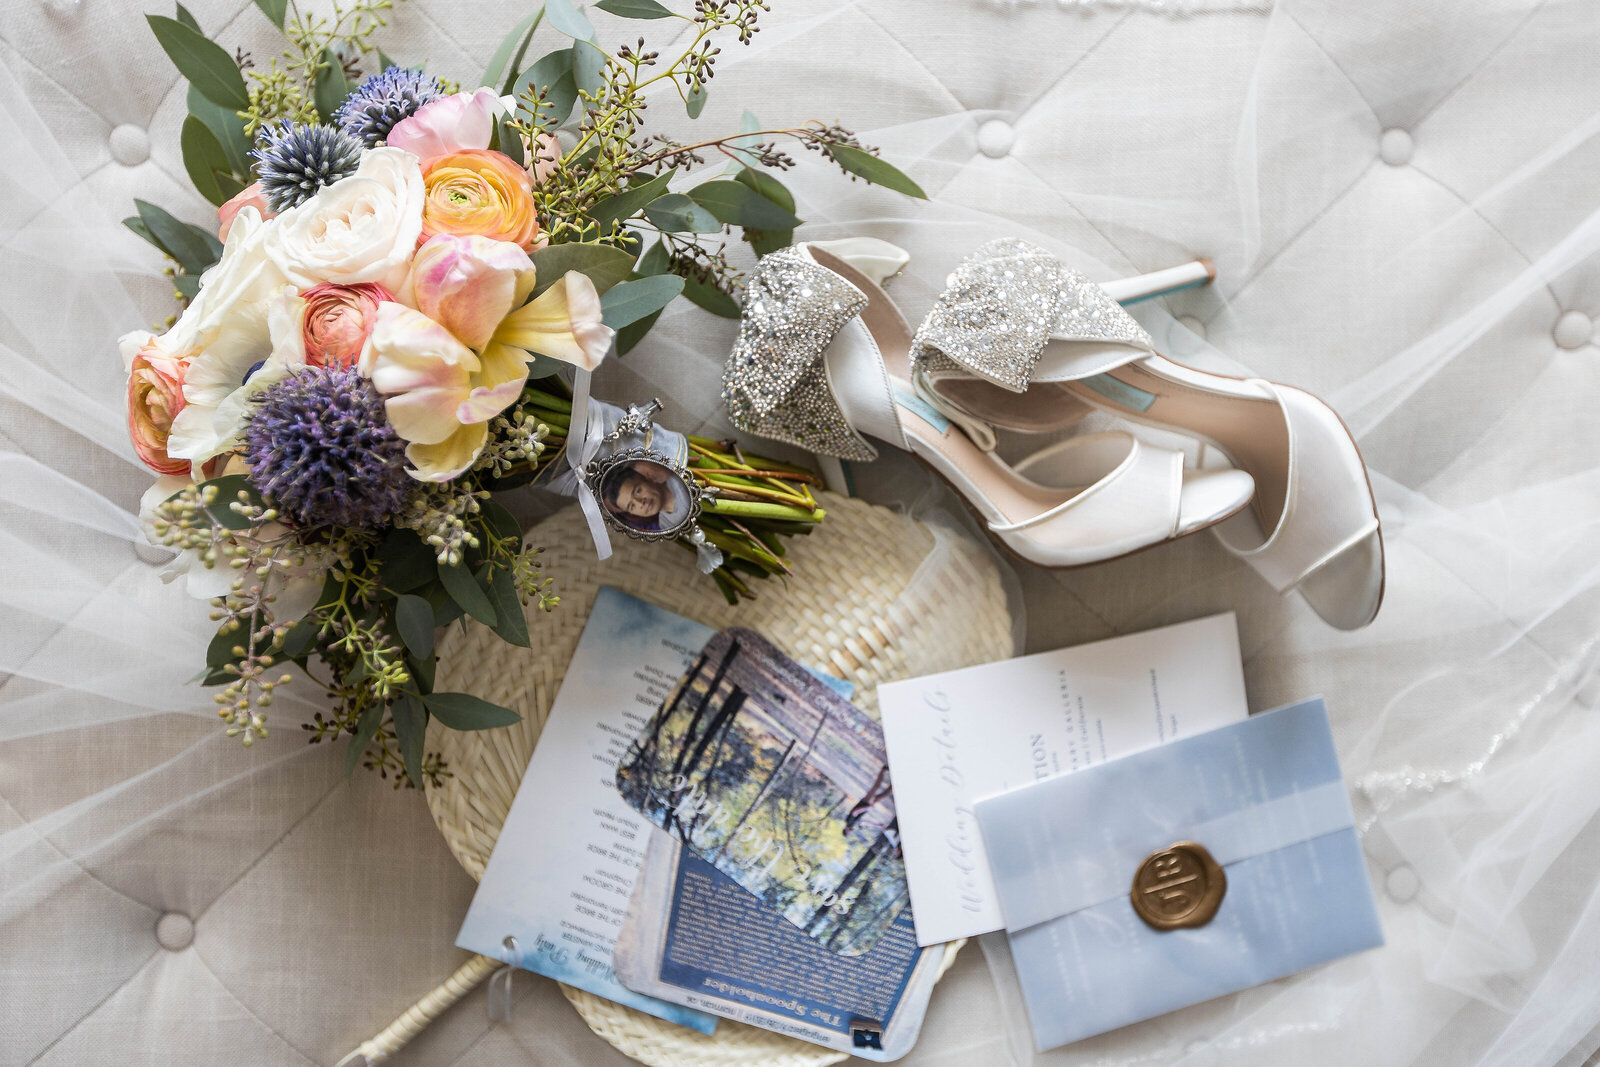 Wedding details, including shoes, flowers and invitations captured by philippe studio pro, sacramento wedding photographer.